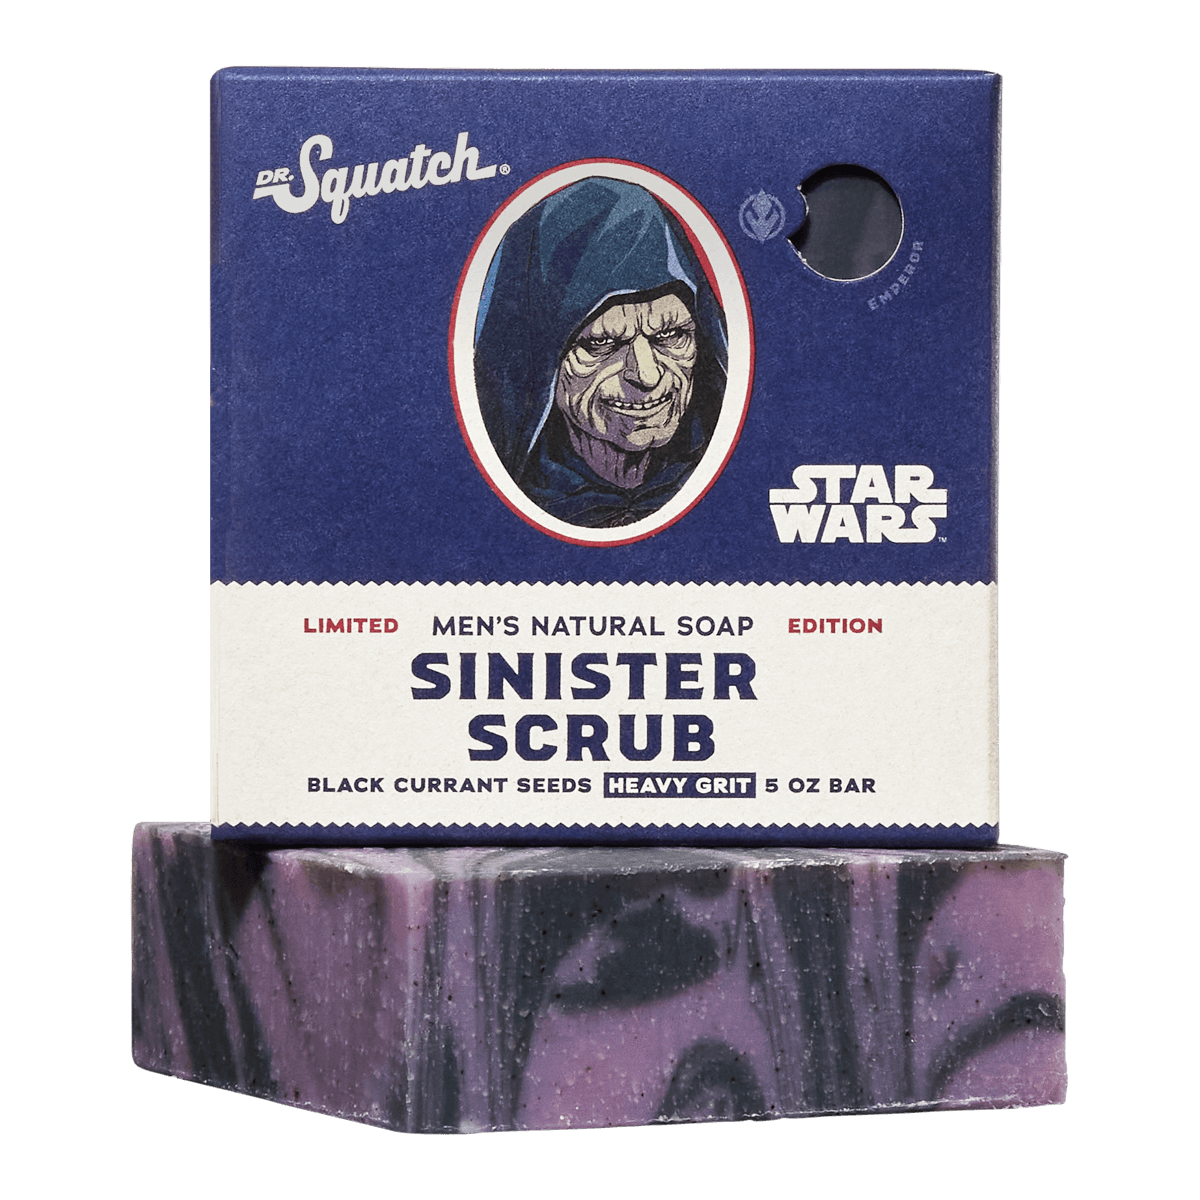 Introducing The Dr. Squatch Soap Star Wars™ Collection - Limited